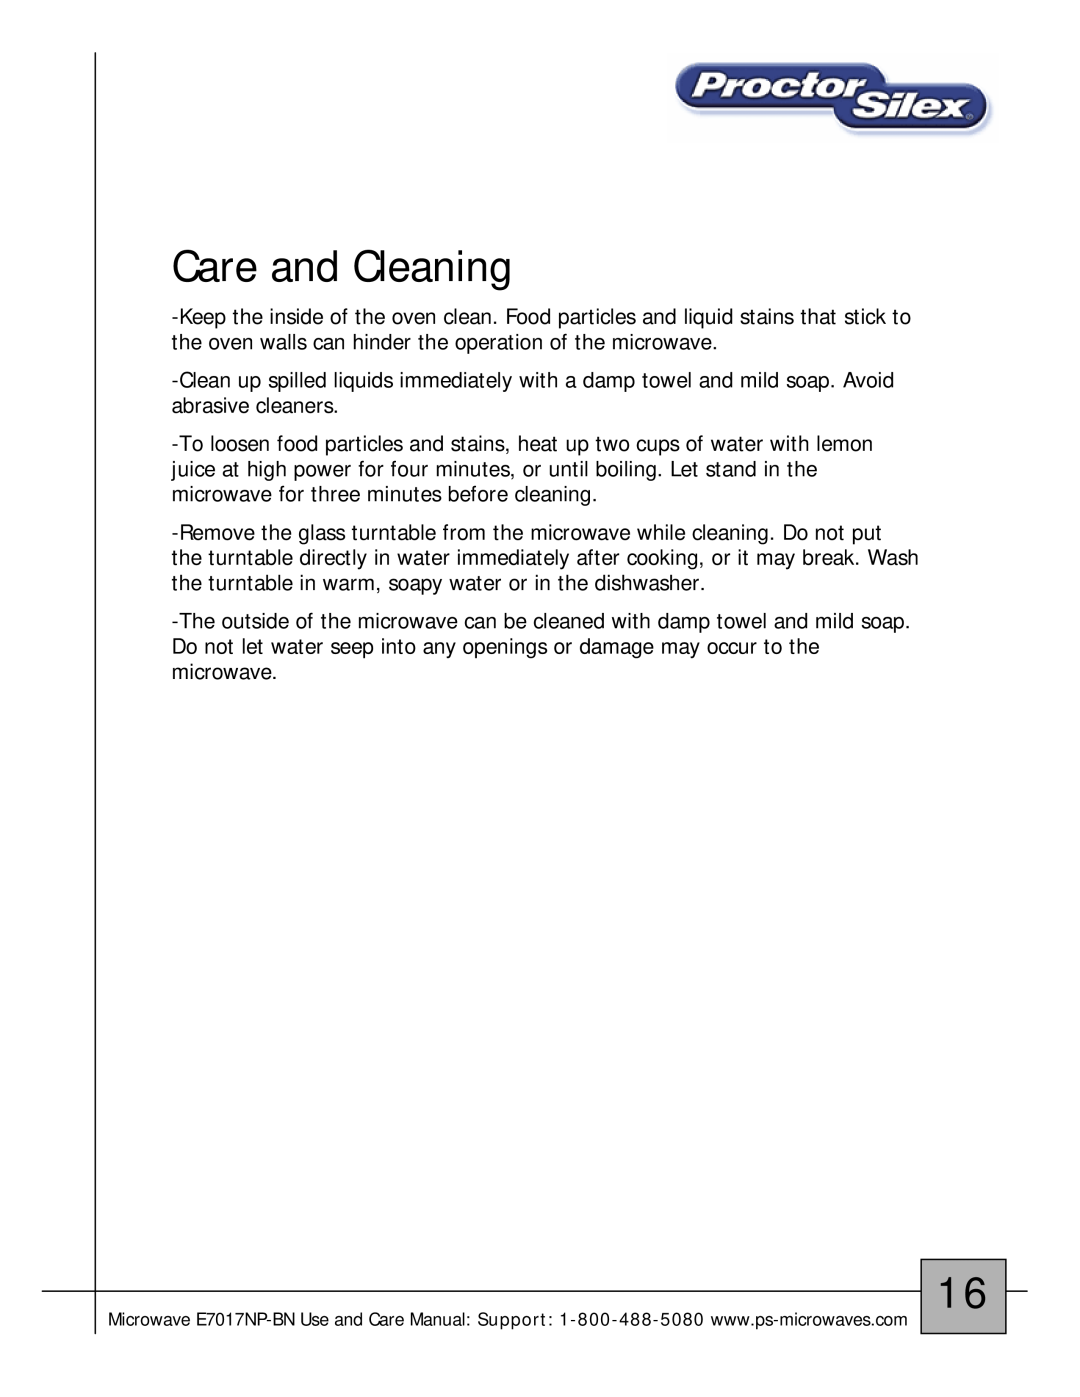 Proctor-Silex E7017NP-BN owner manual Care and Cleaning 